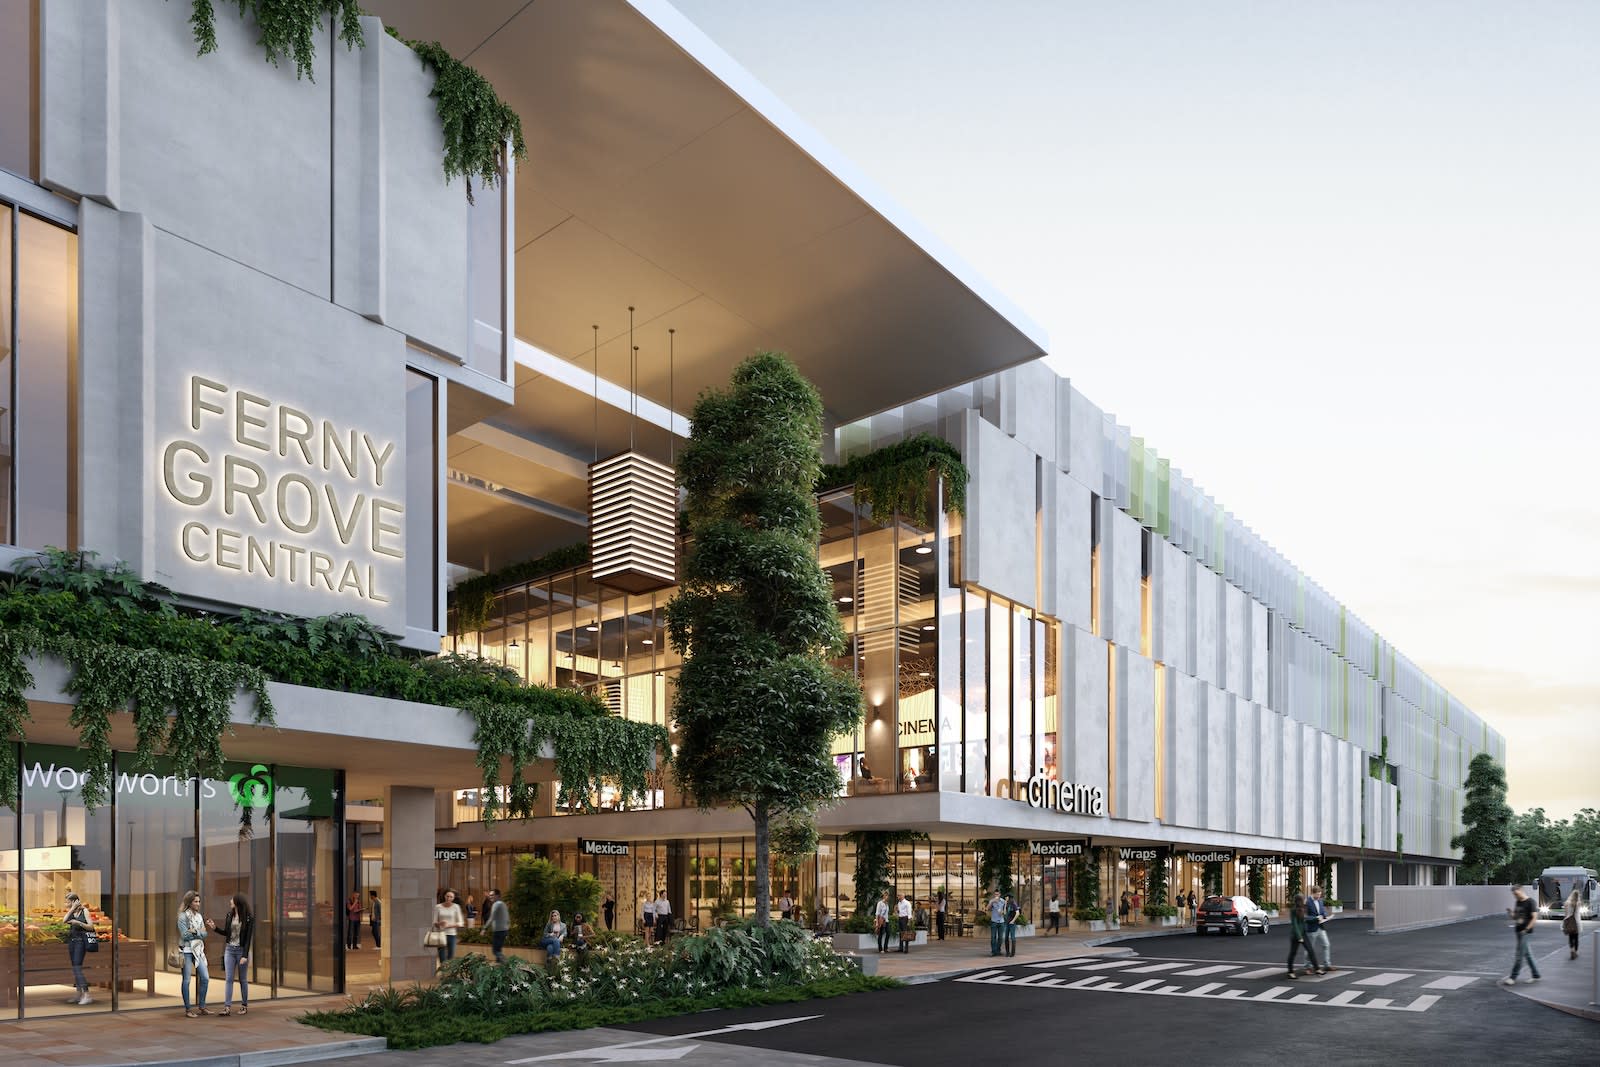 Revealed: $140 million plans for mixed-use Ferny Grove Central project in Brisbane